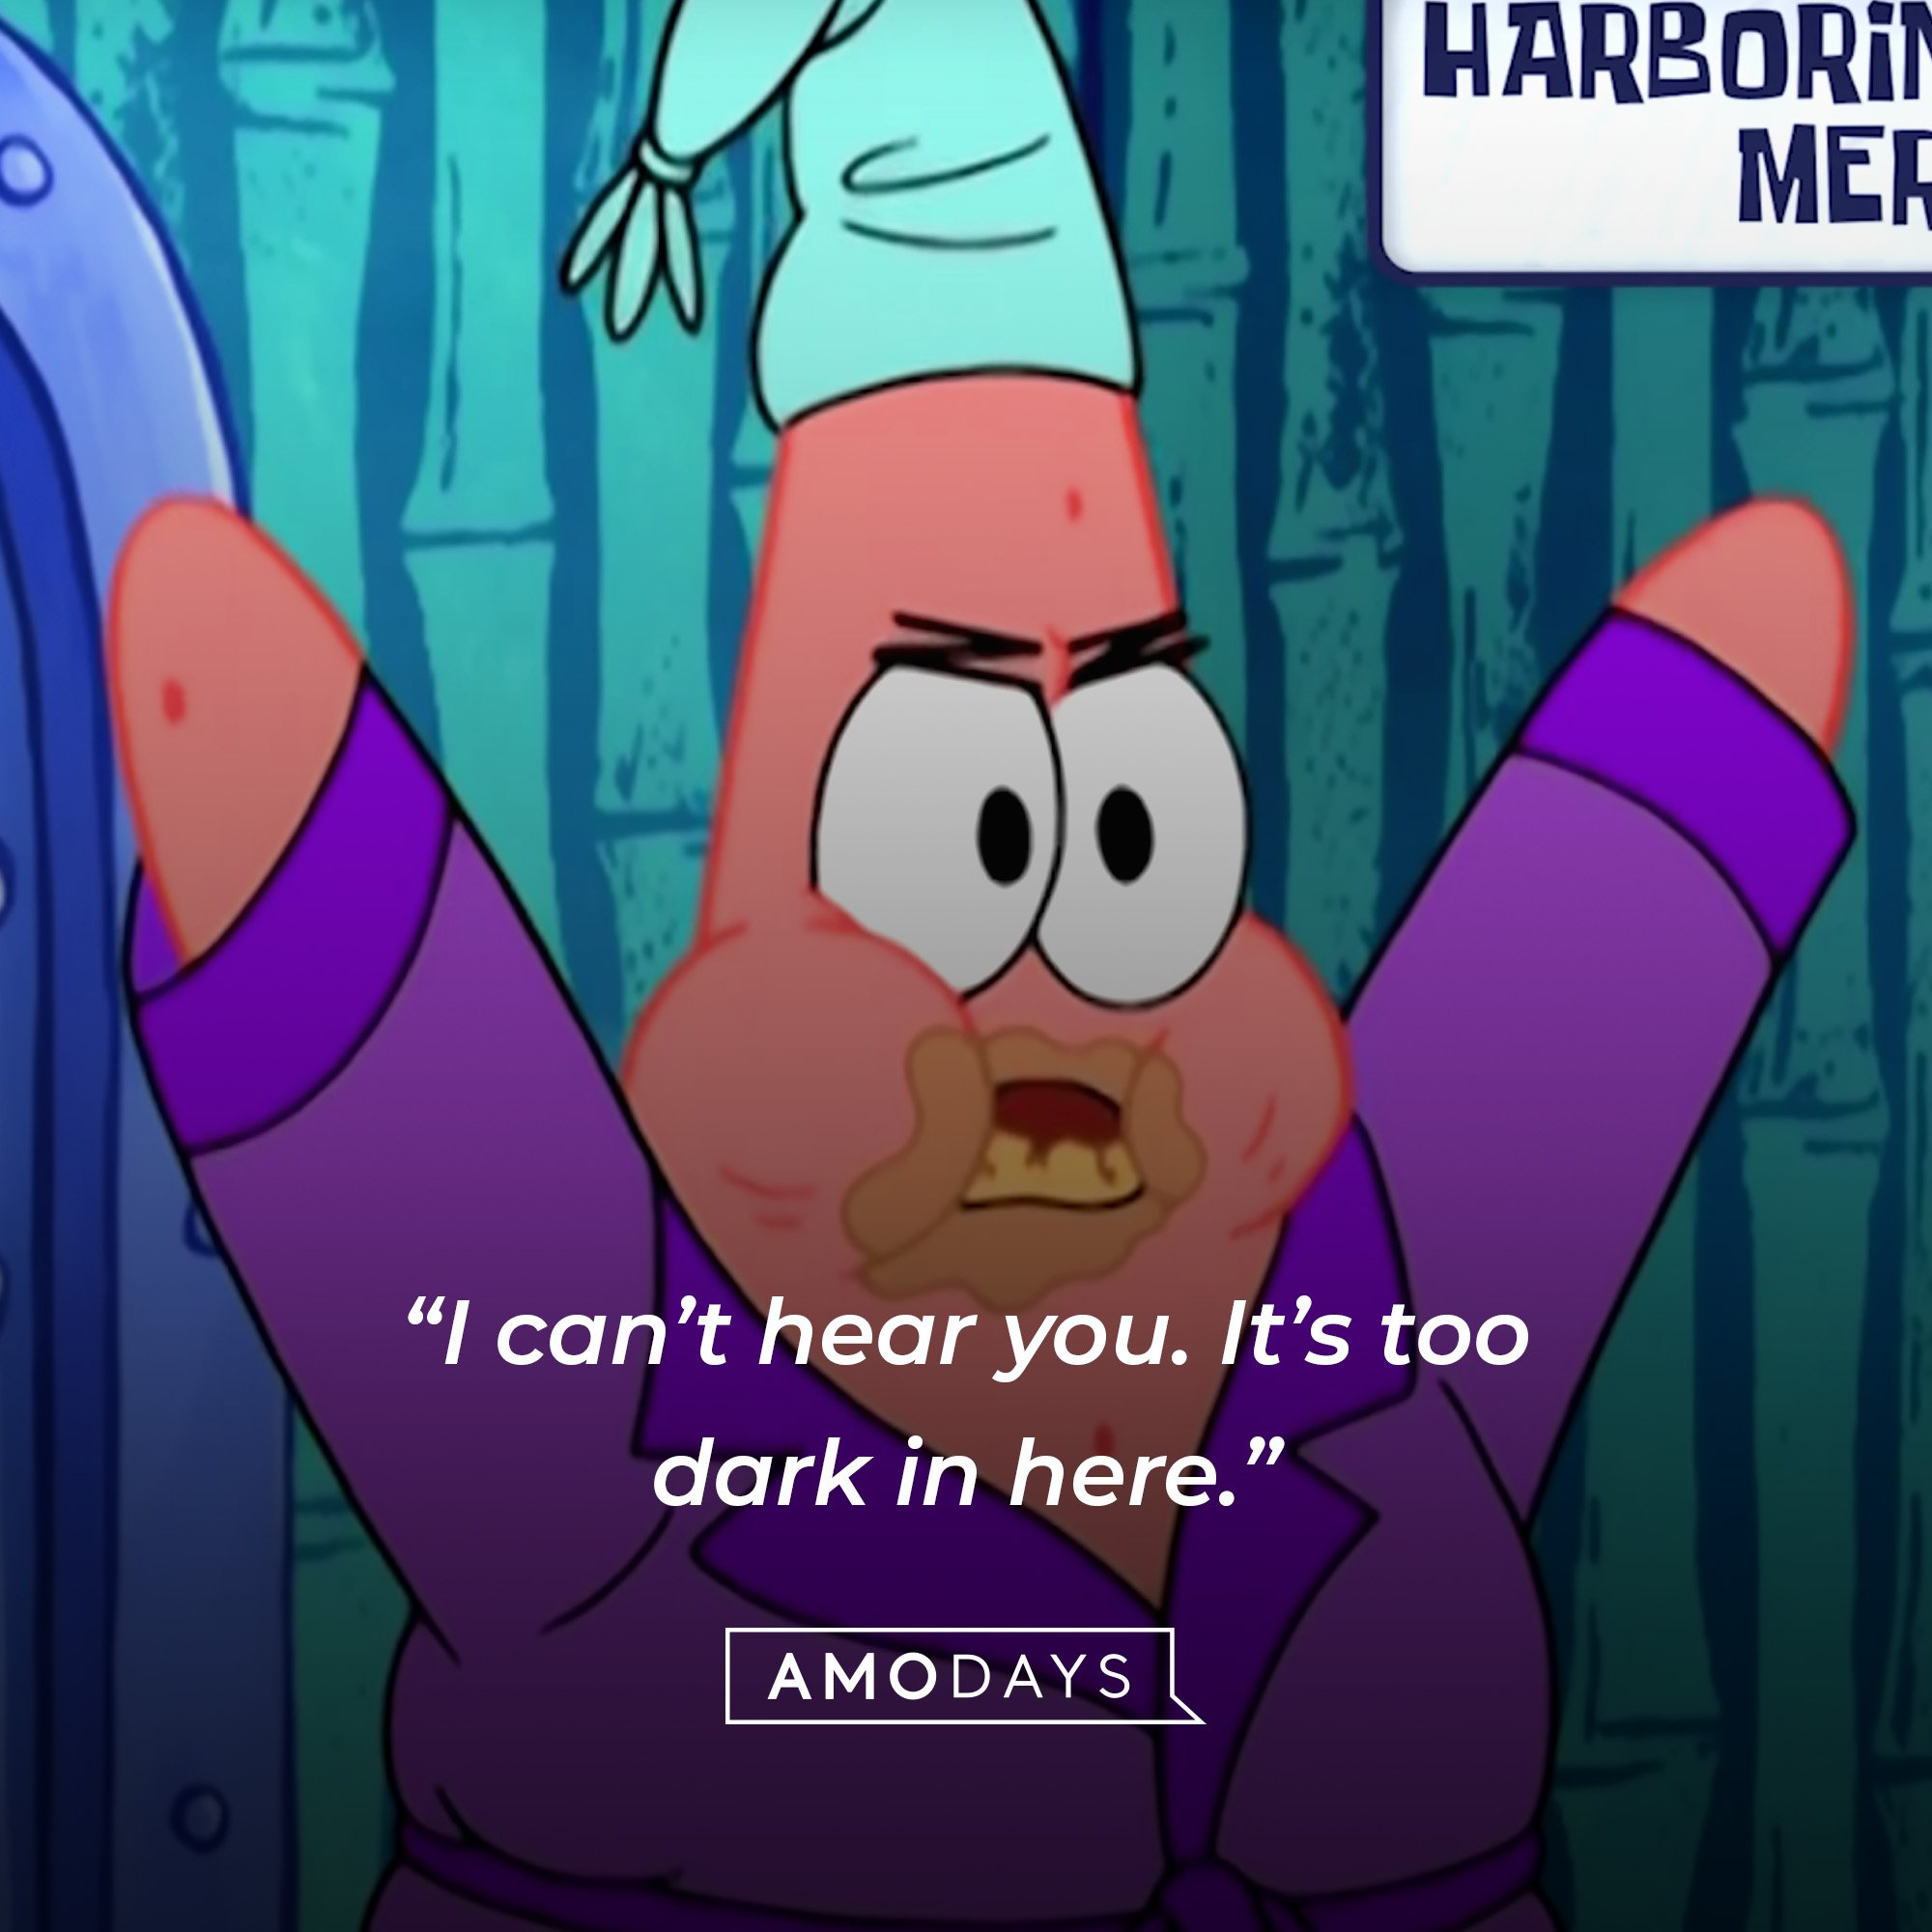 Patrick Star’s quote: “I can’t hear you. It’s too dark in here.” | Image: AmoDays